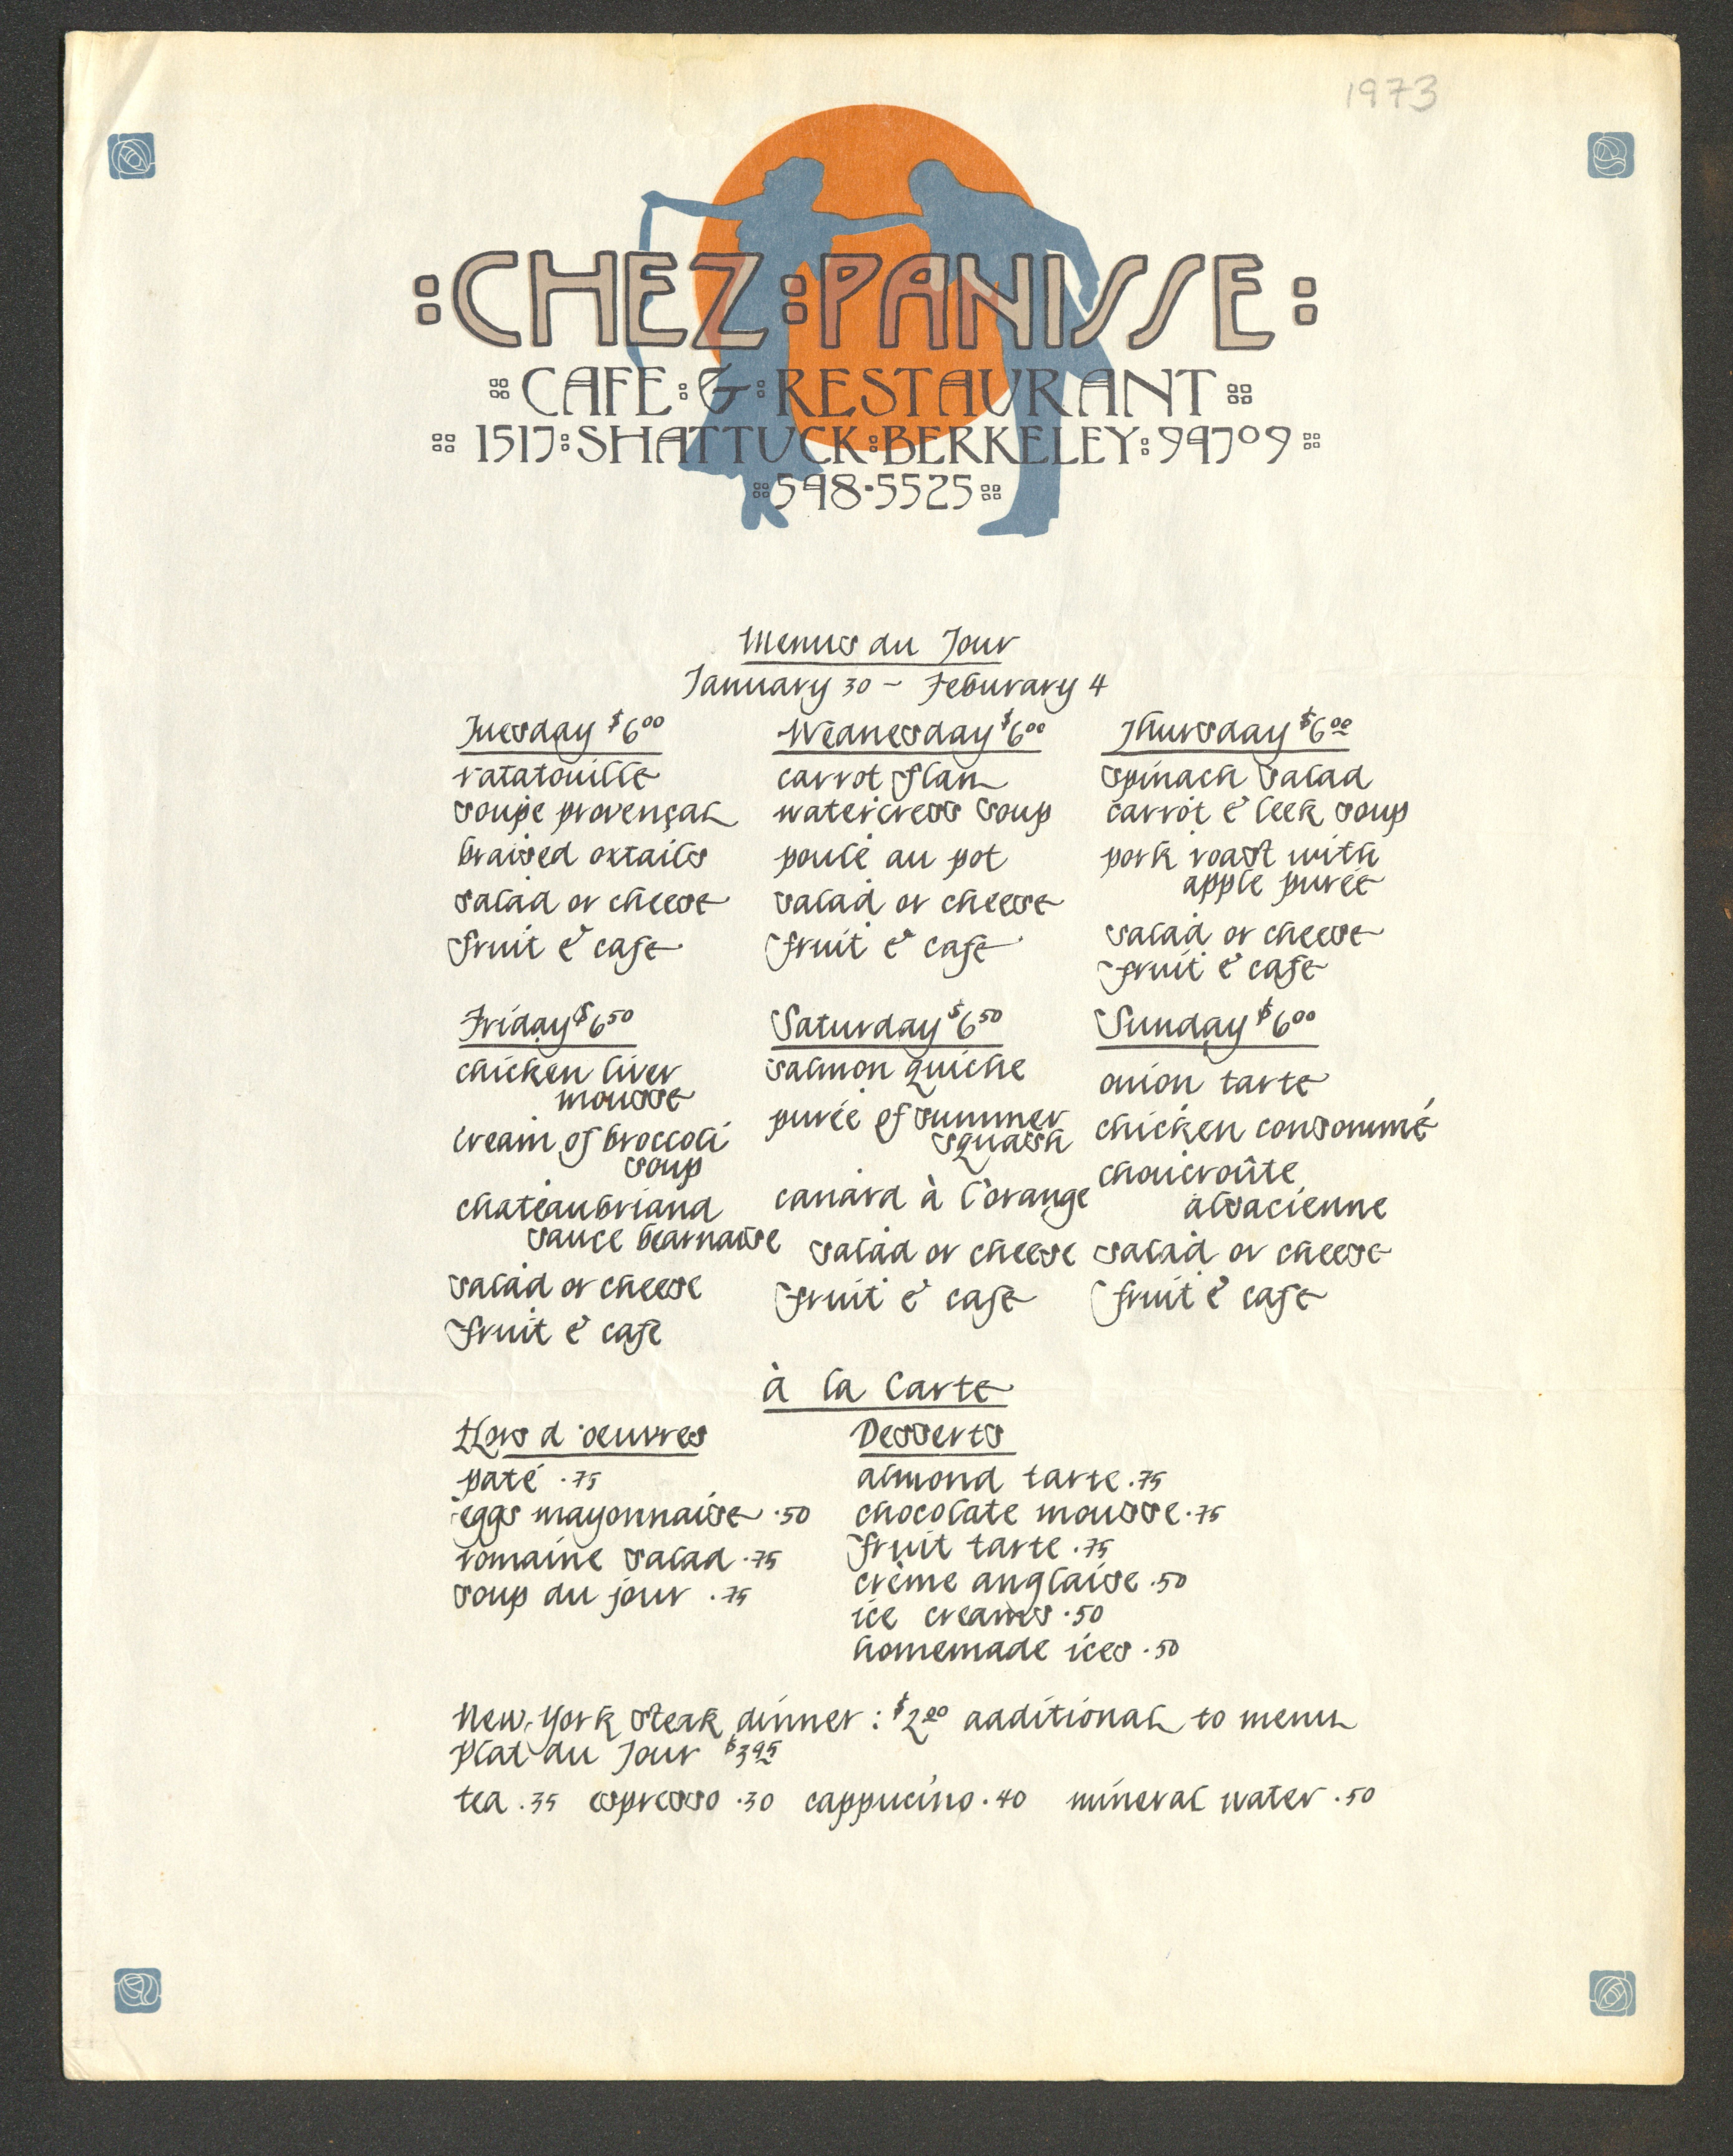 Handwritten menu on cream paper with "Chez Panisse" at the top over a silhouette of two people dancing in front of an orange moon. 